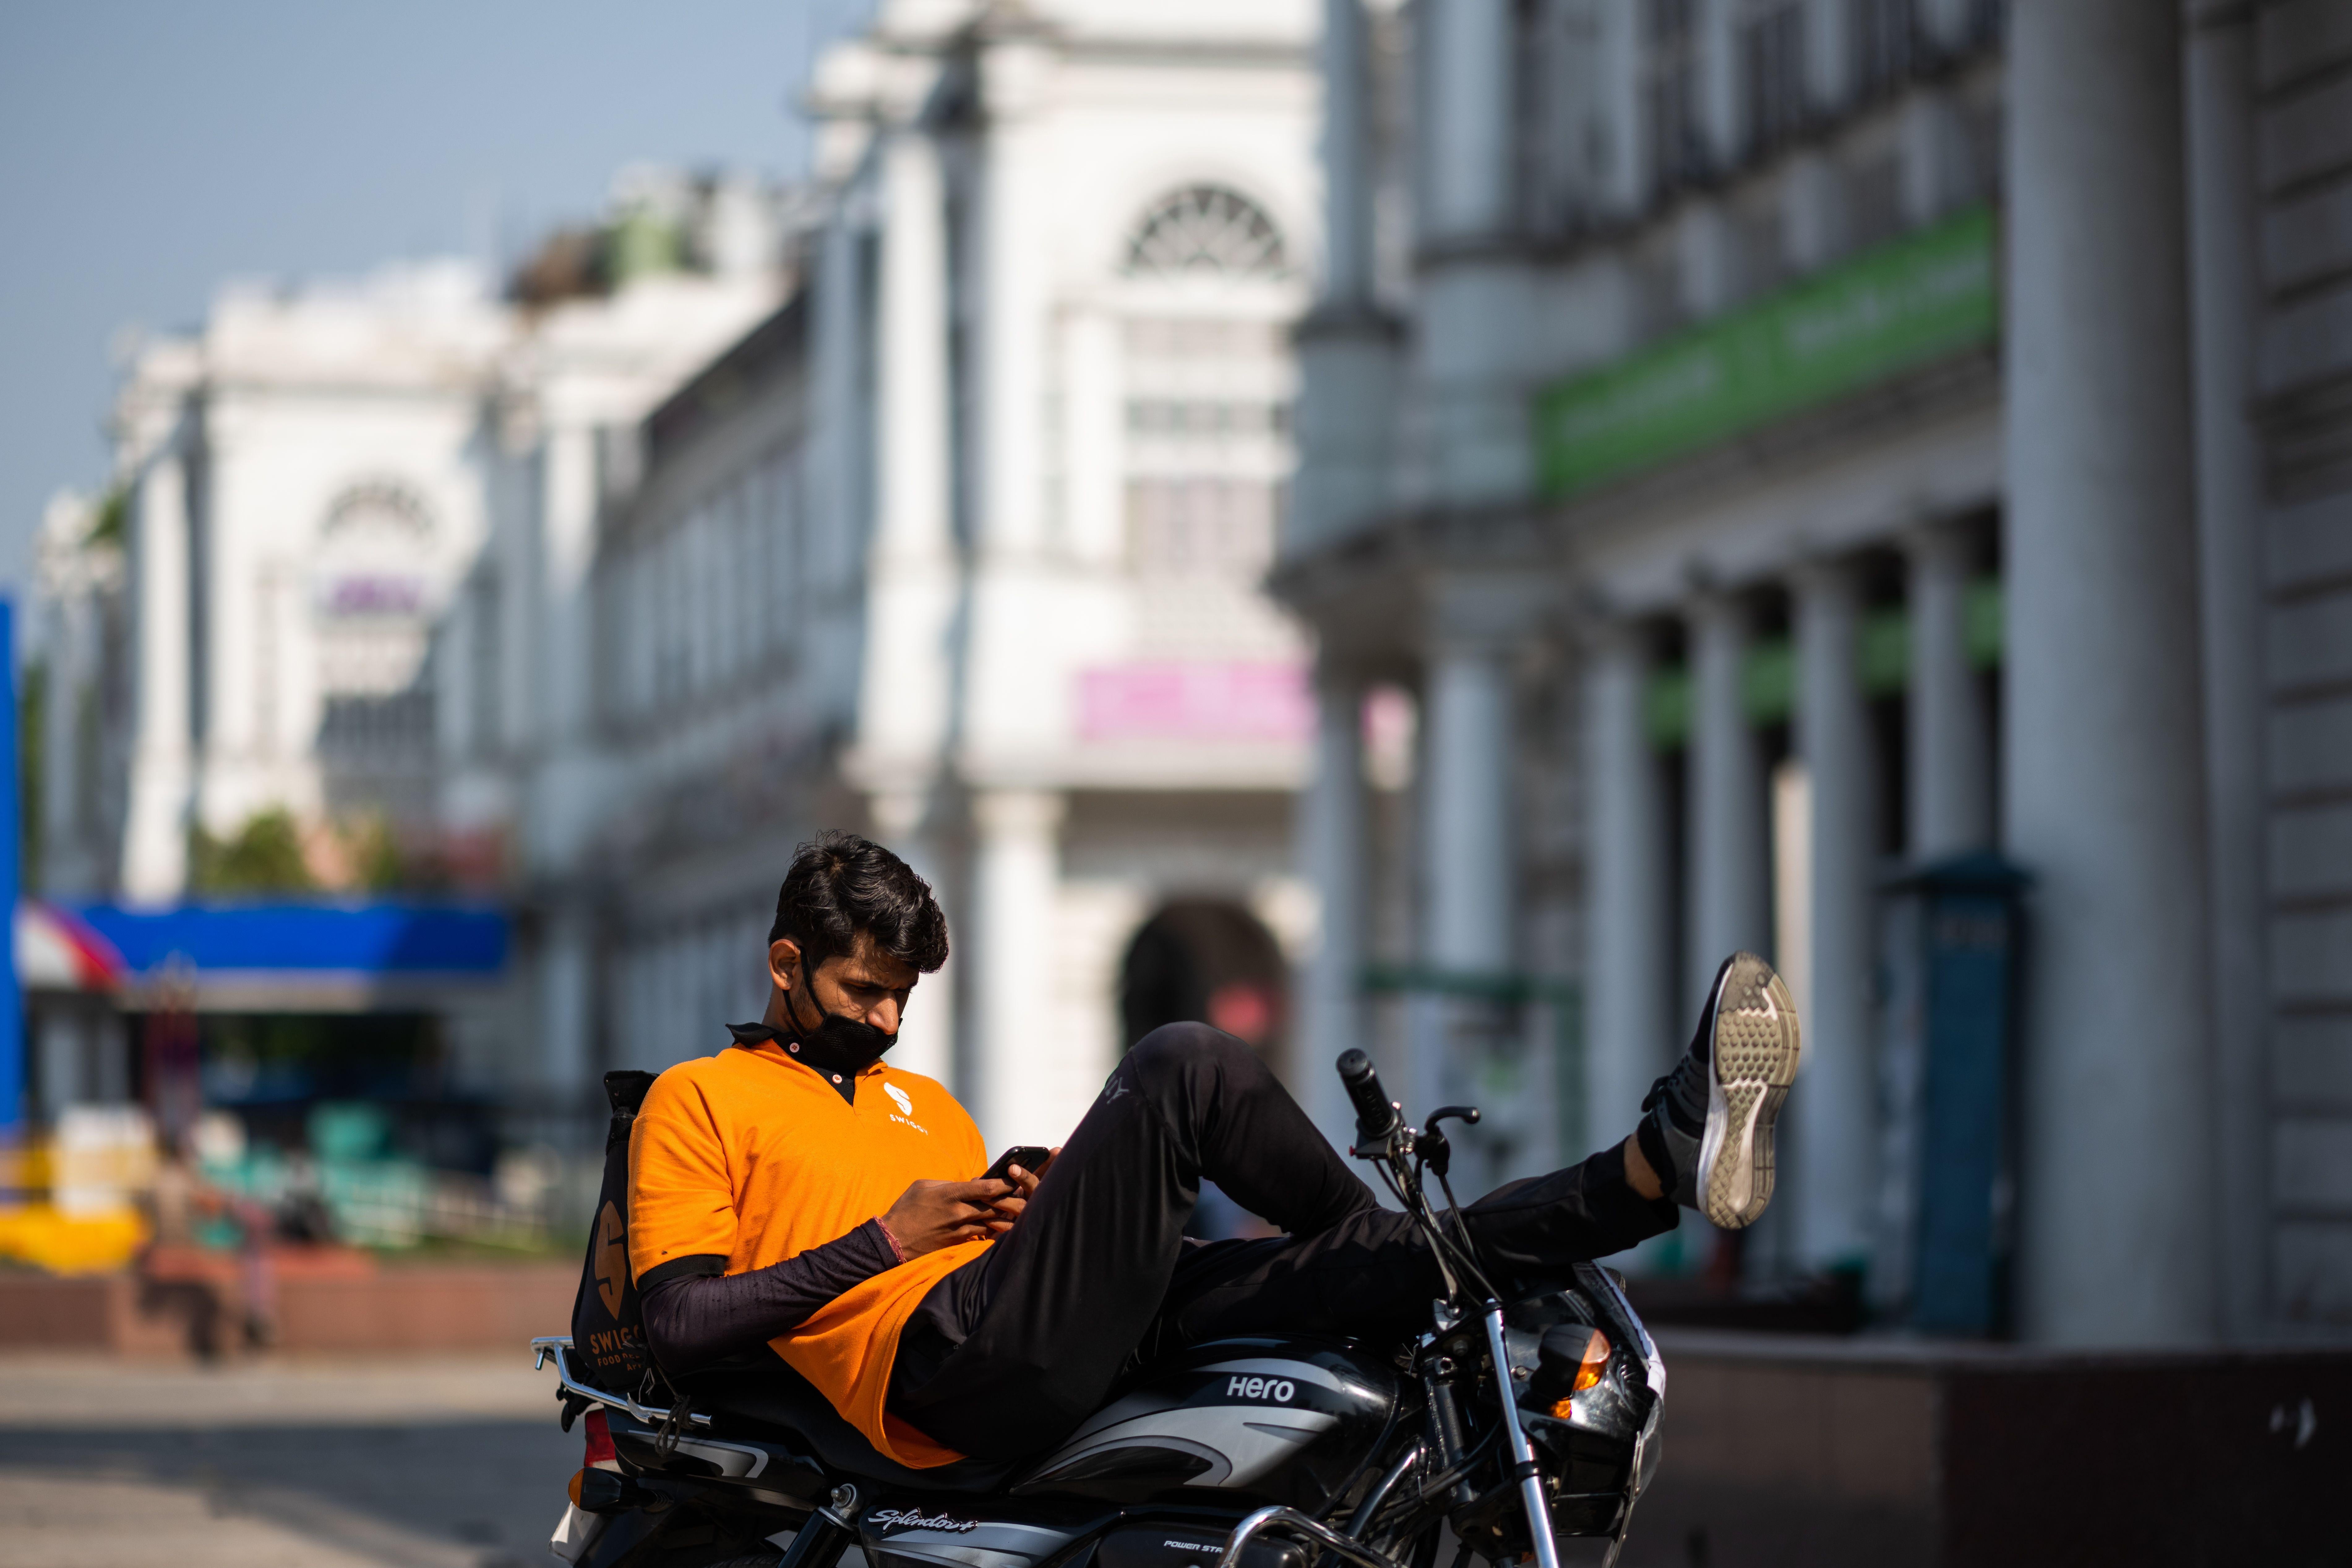 A man lounging on a stationary motorbike checks his phone.